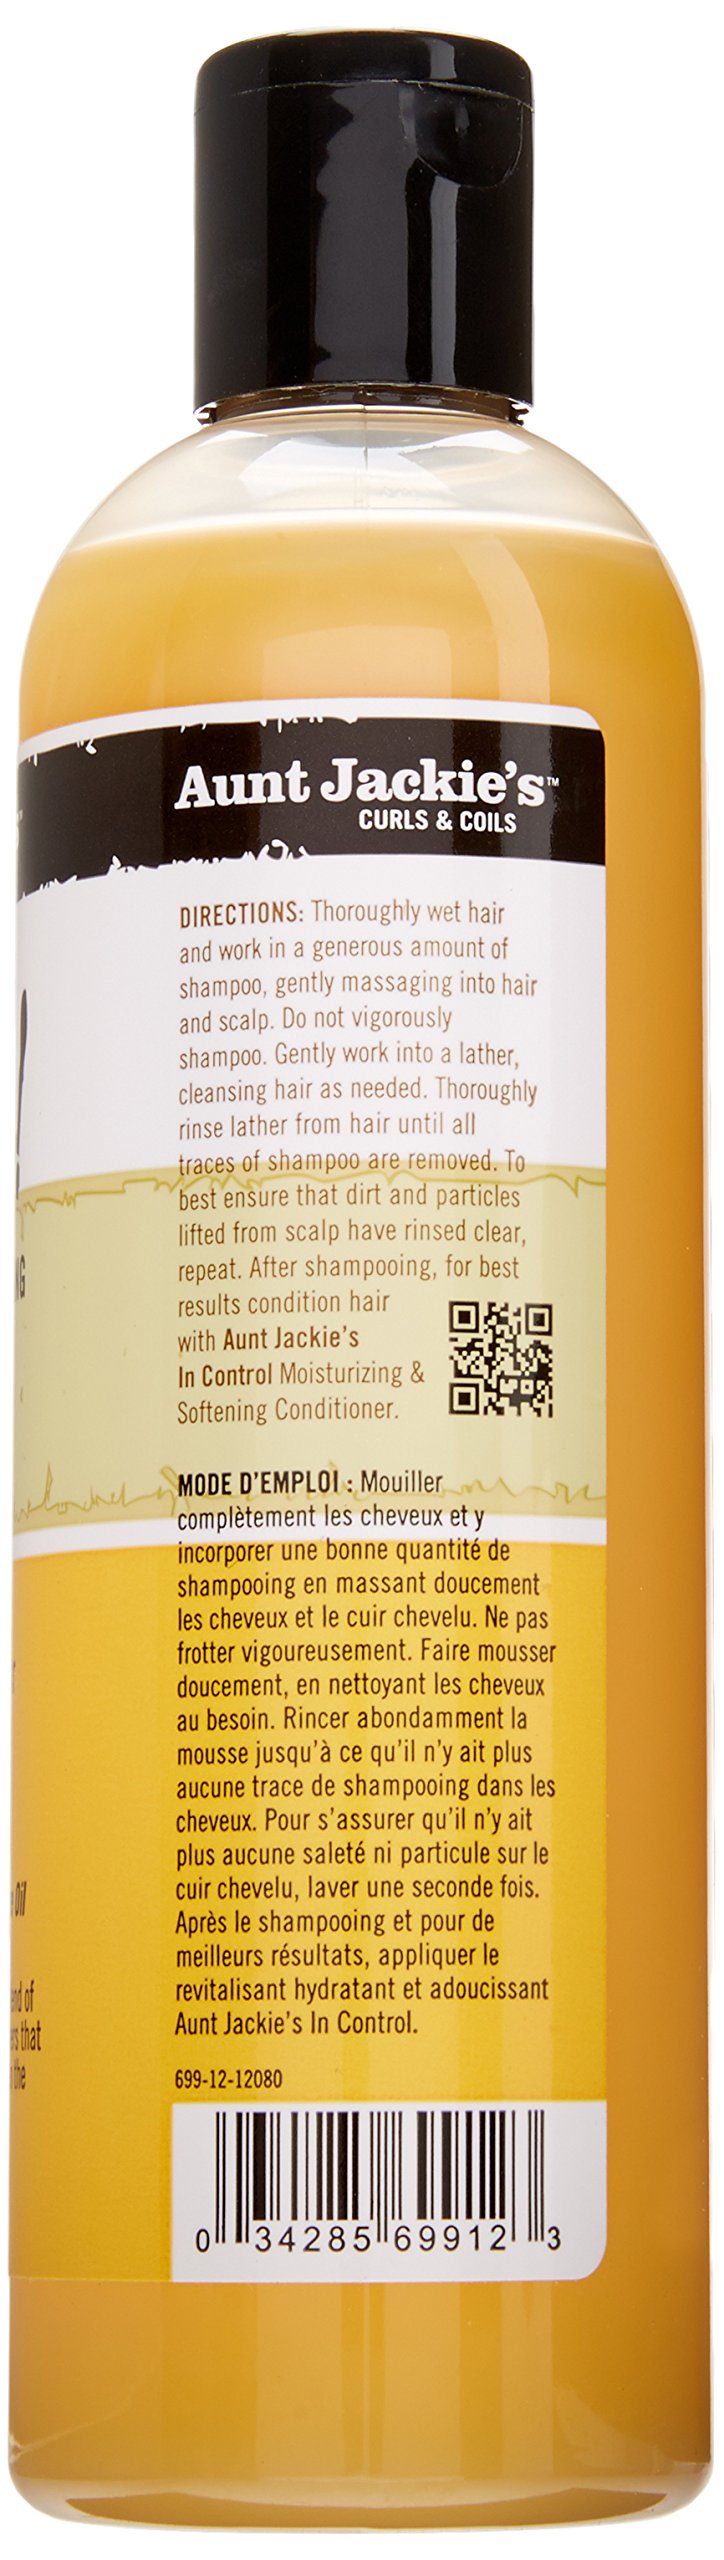 Aunt Jackie's Oh So Clean Lather-rich Deep Moisturizing Shampoo, Revives Fragile, Dry Hair, Enriched with Coconut Oil, Shea Butter and Extra Virgin Olive Oil, 12 Ounce Bottle - Duafe Beauty Collective